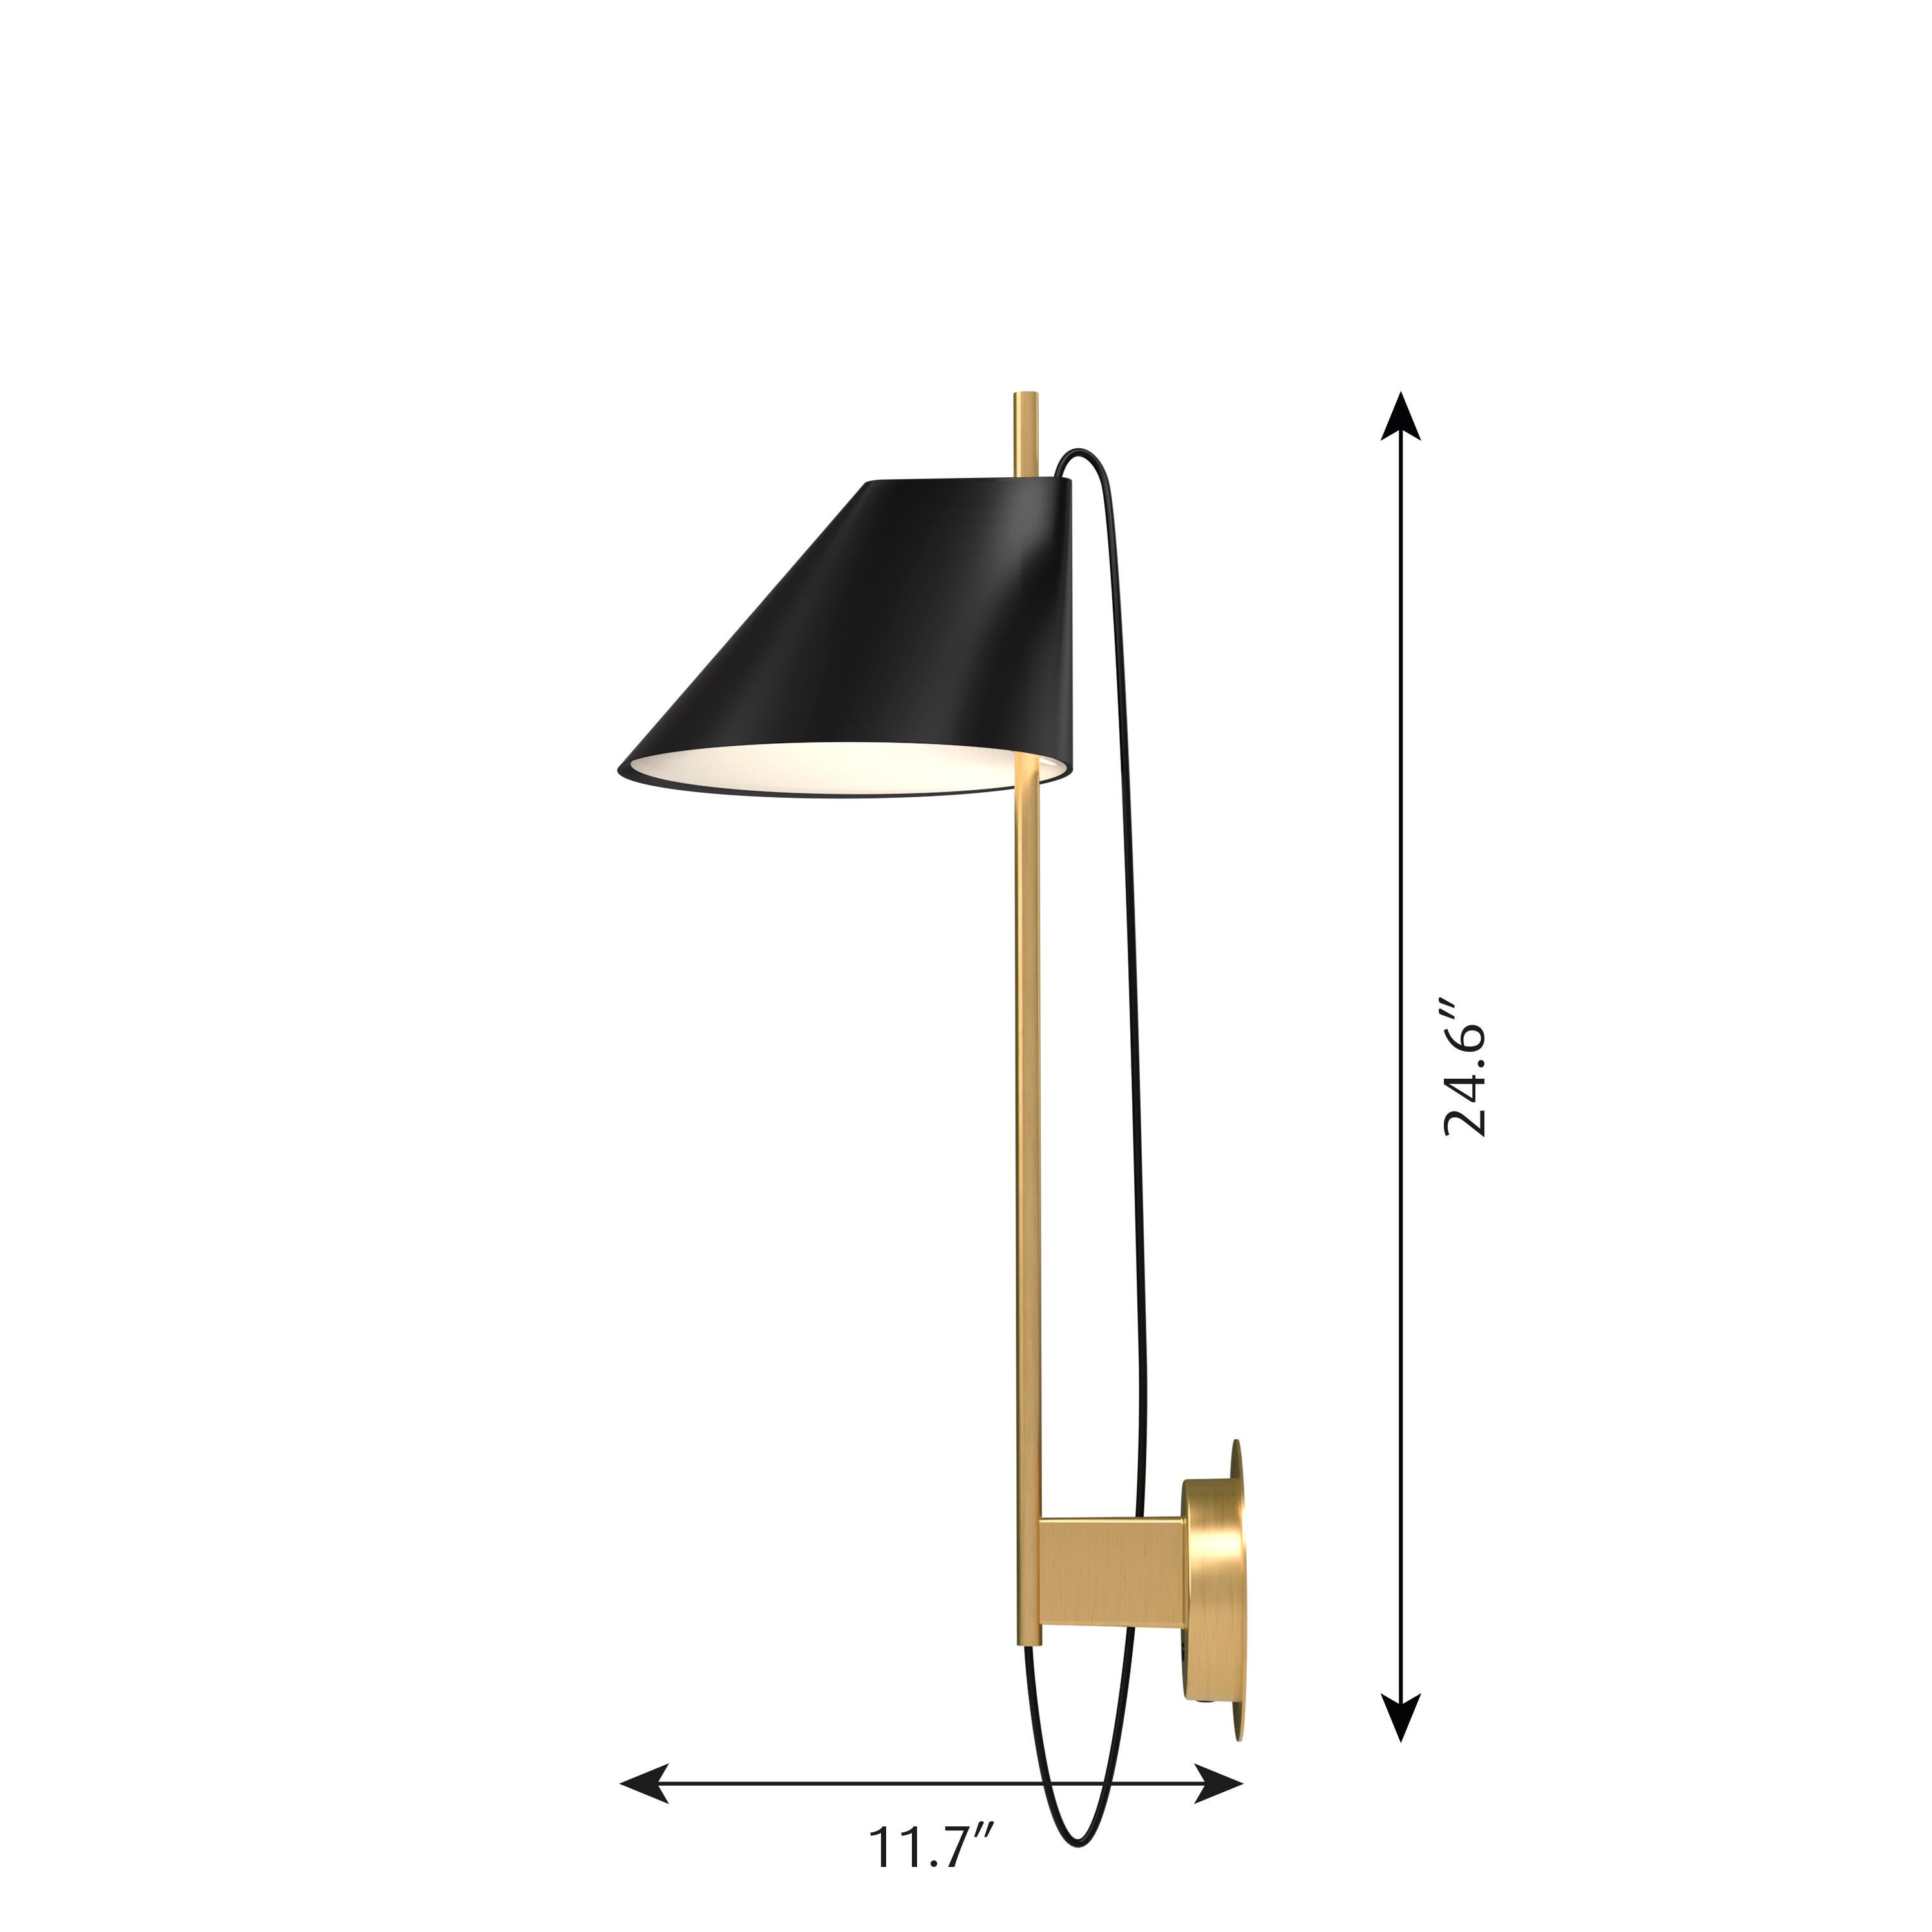 GamFratesi black and brass 'YUH' wall light for Louis Poulsen. Designed by Stine Gam and Enrico Fratesi, the YUH reflects Louis Poulsen’s philosophy of designing to shape light. Inspired by the Classic virtues of Danish Modernism, Poul Henningsen’s